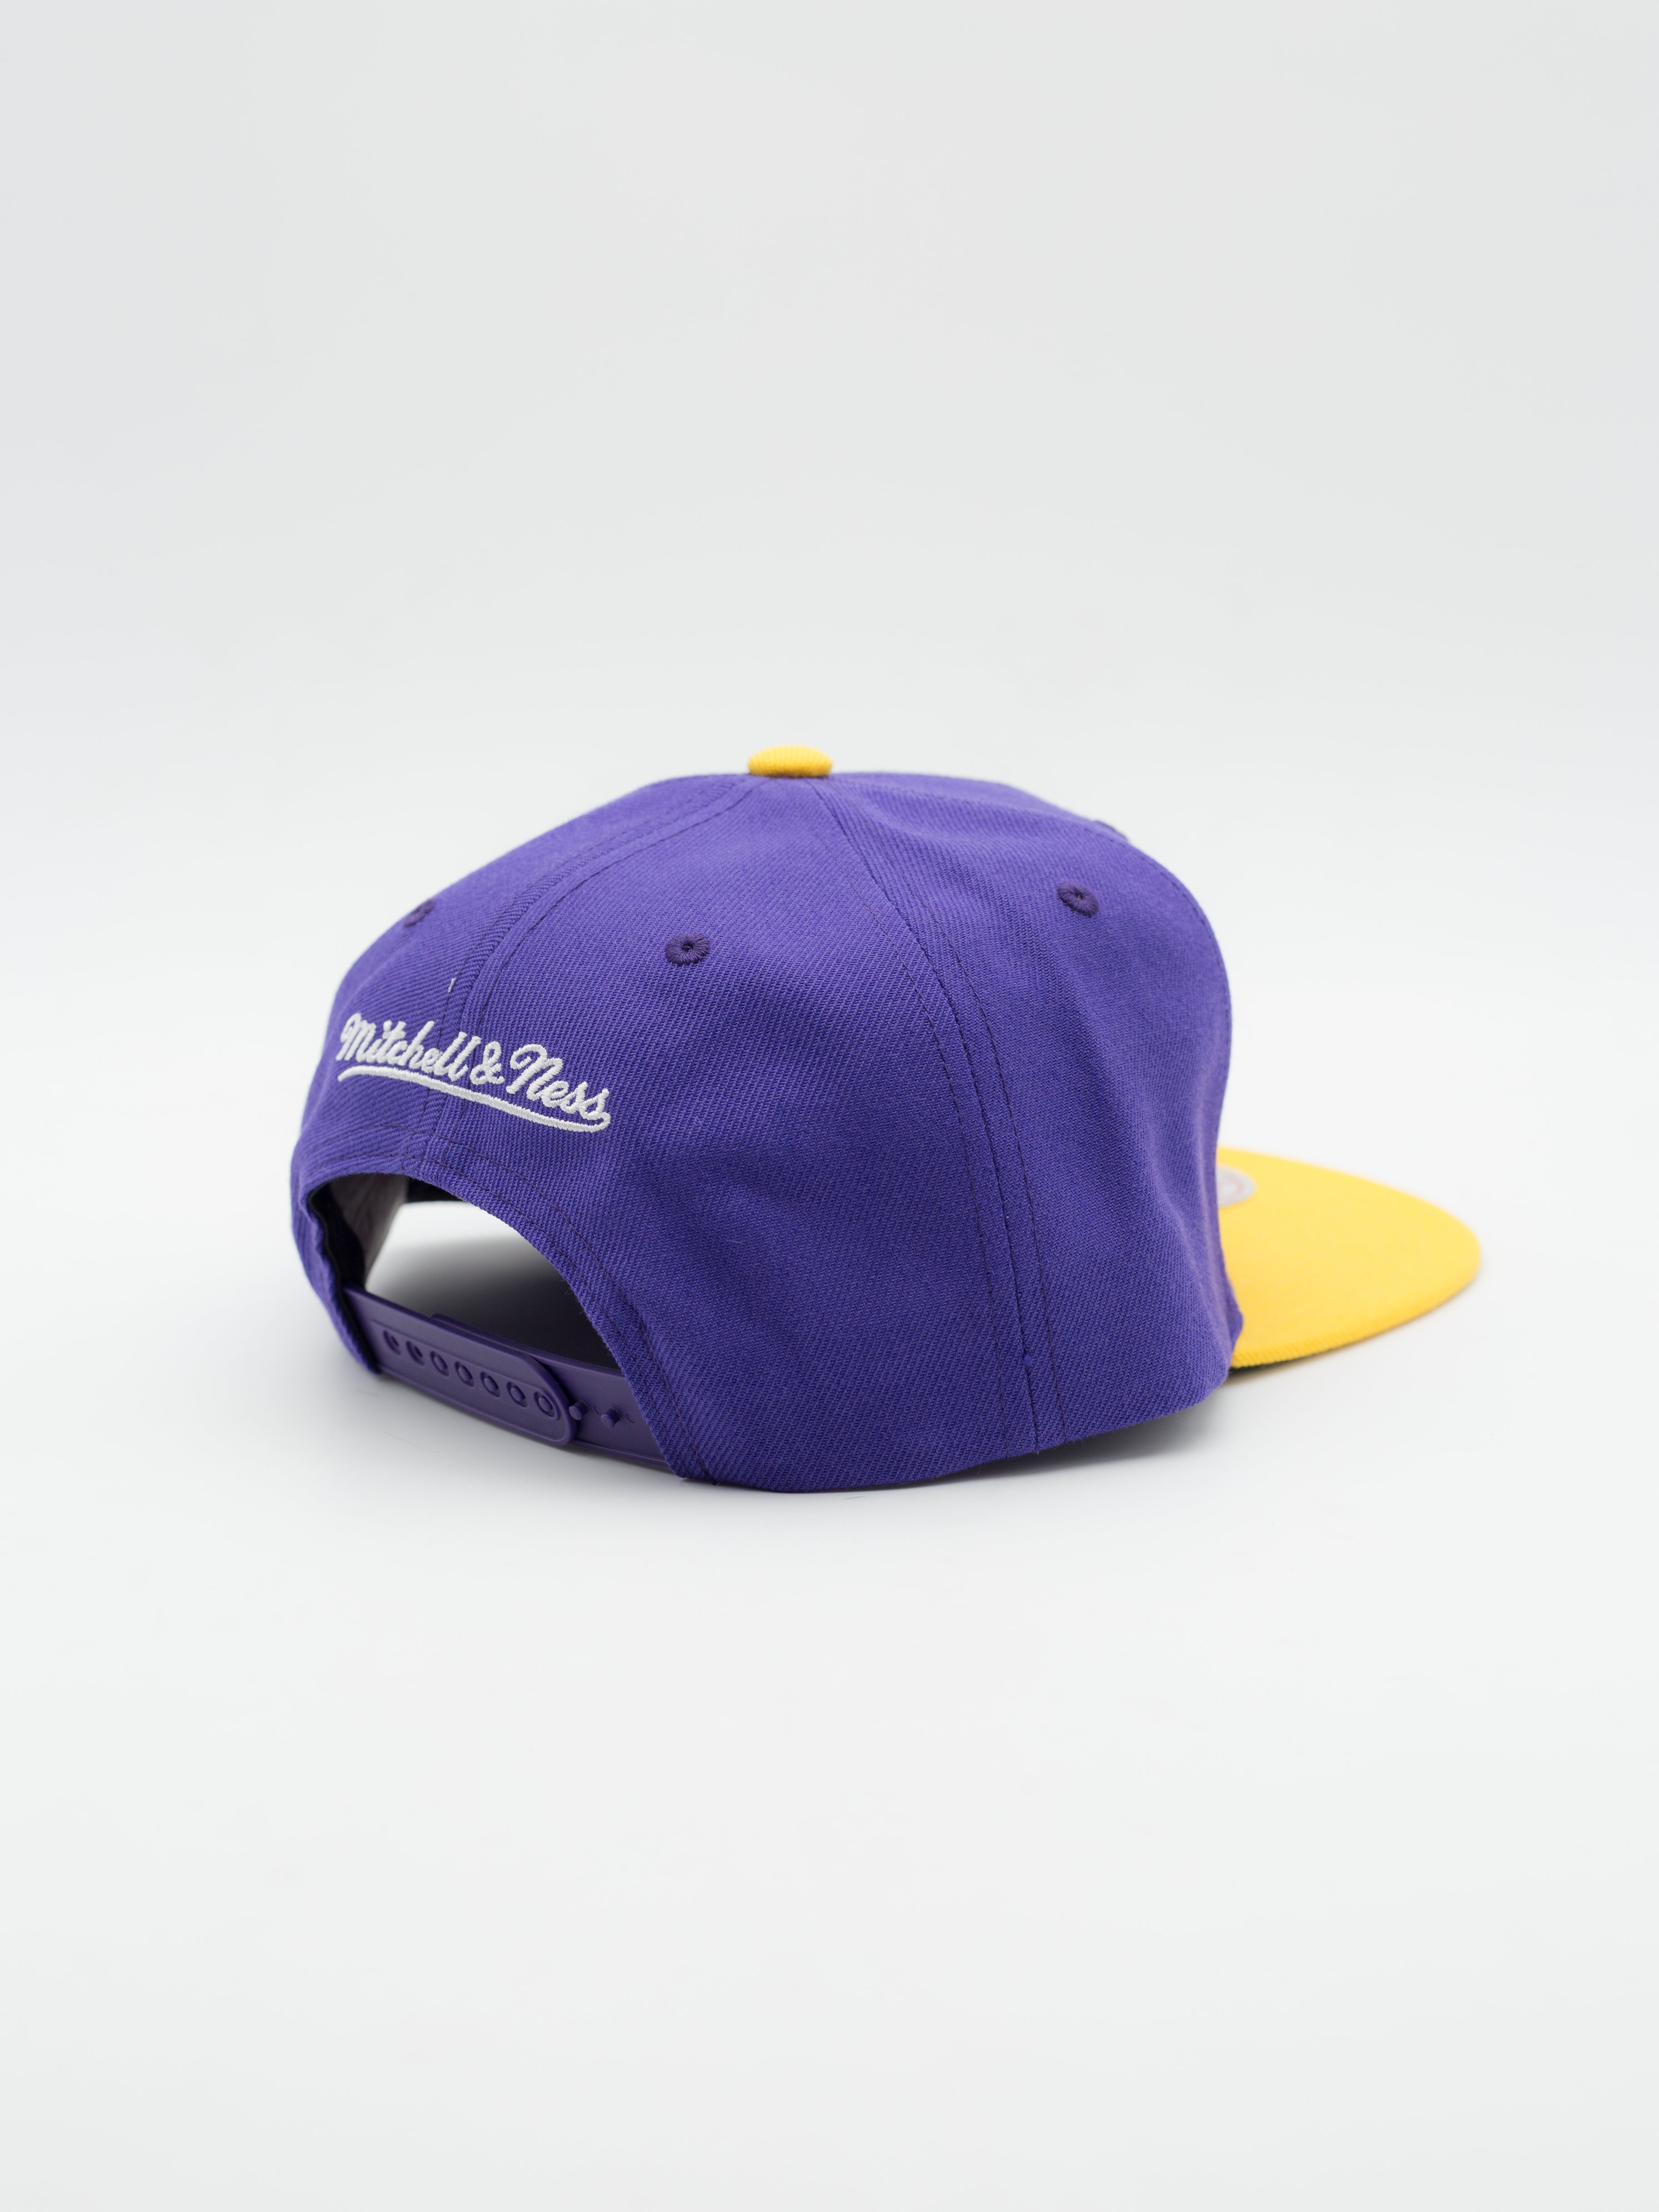 87-88 Back to Back Champs Los Angeles Lakers Snapback